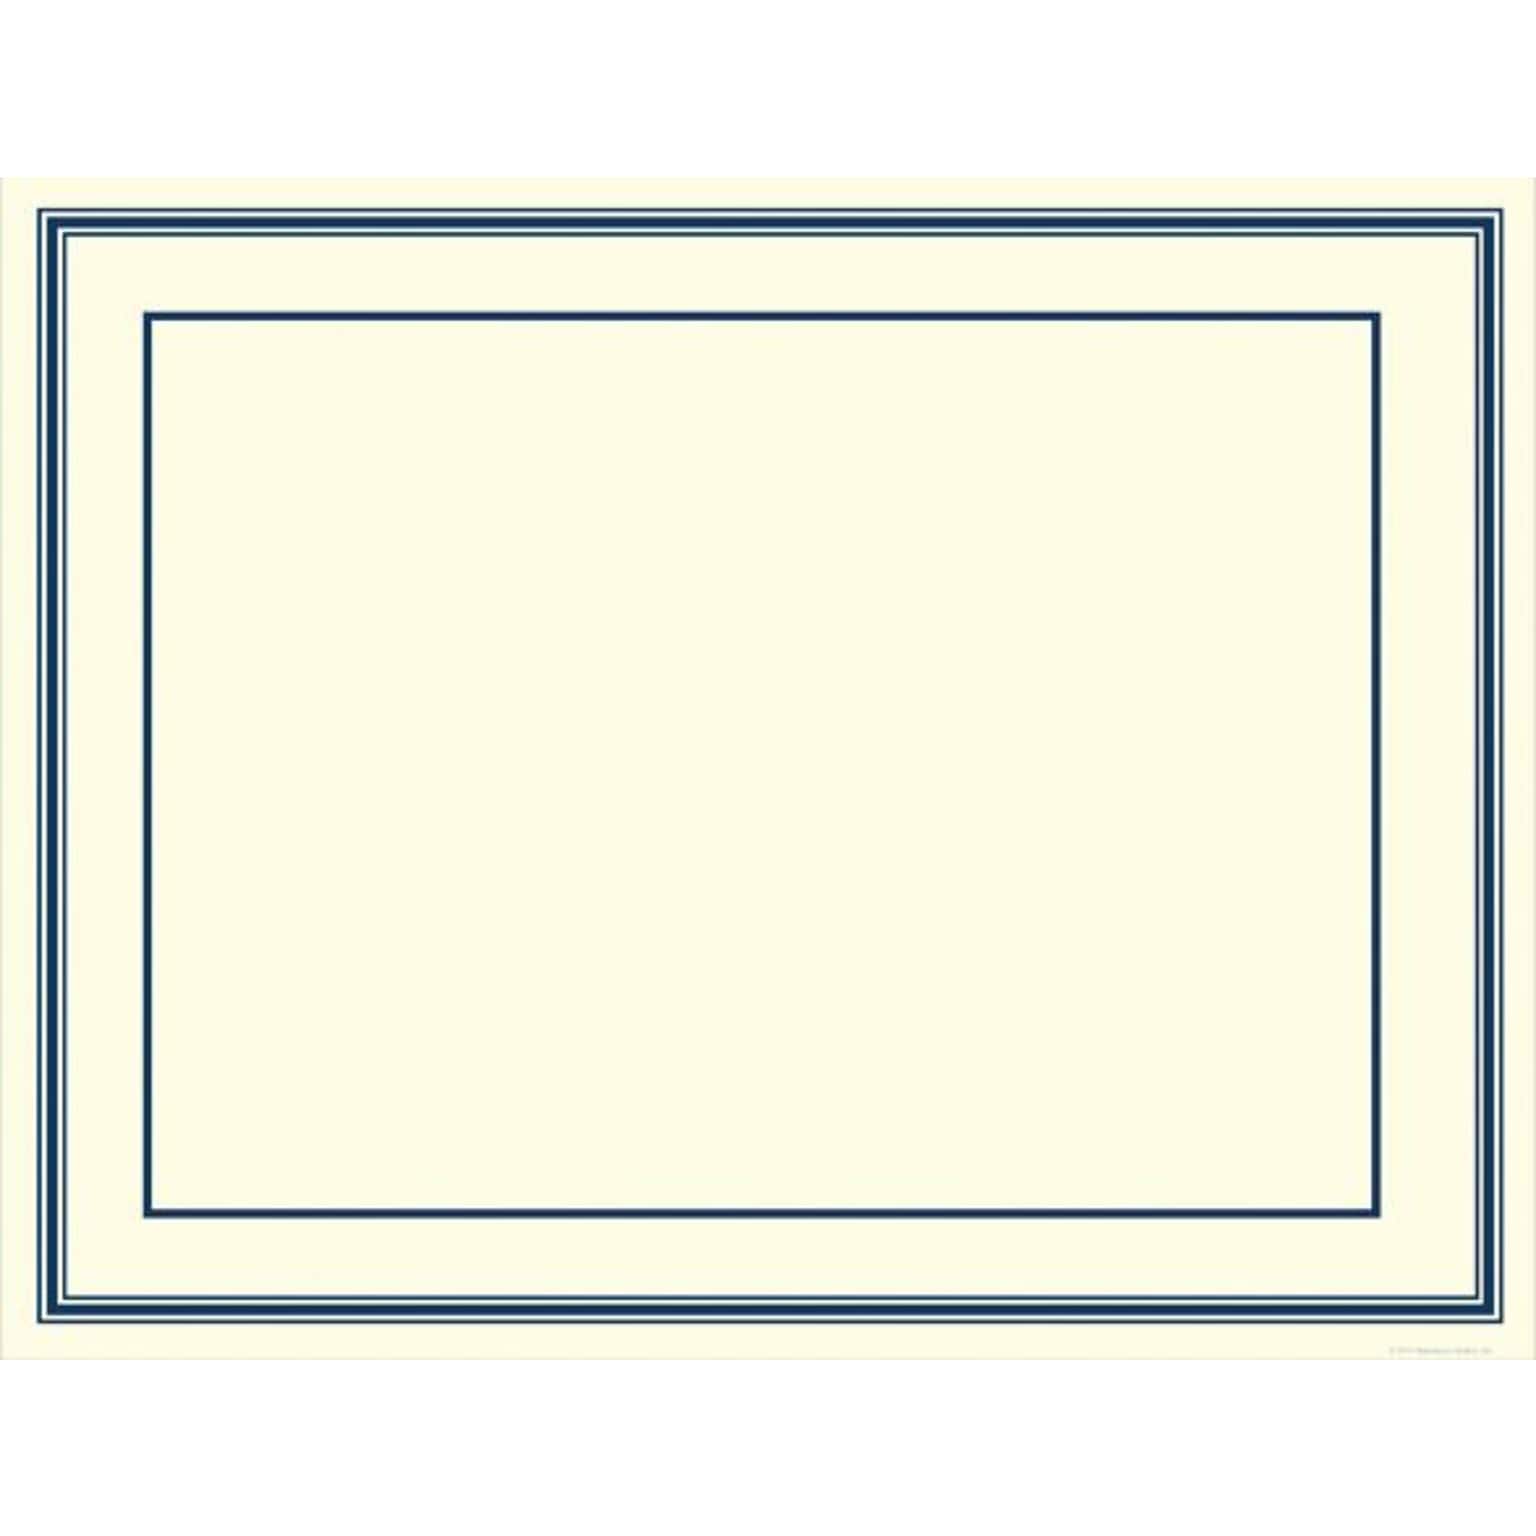 Great Papers Certificates, 8.5 x 11, Navy Blue and Beige, 30/Pack (20103774P2)